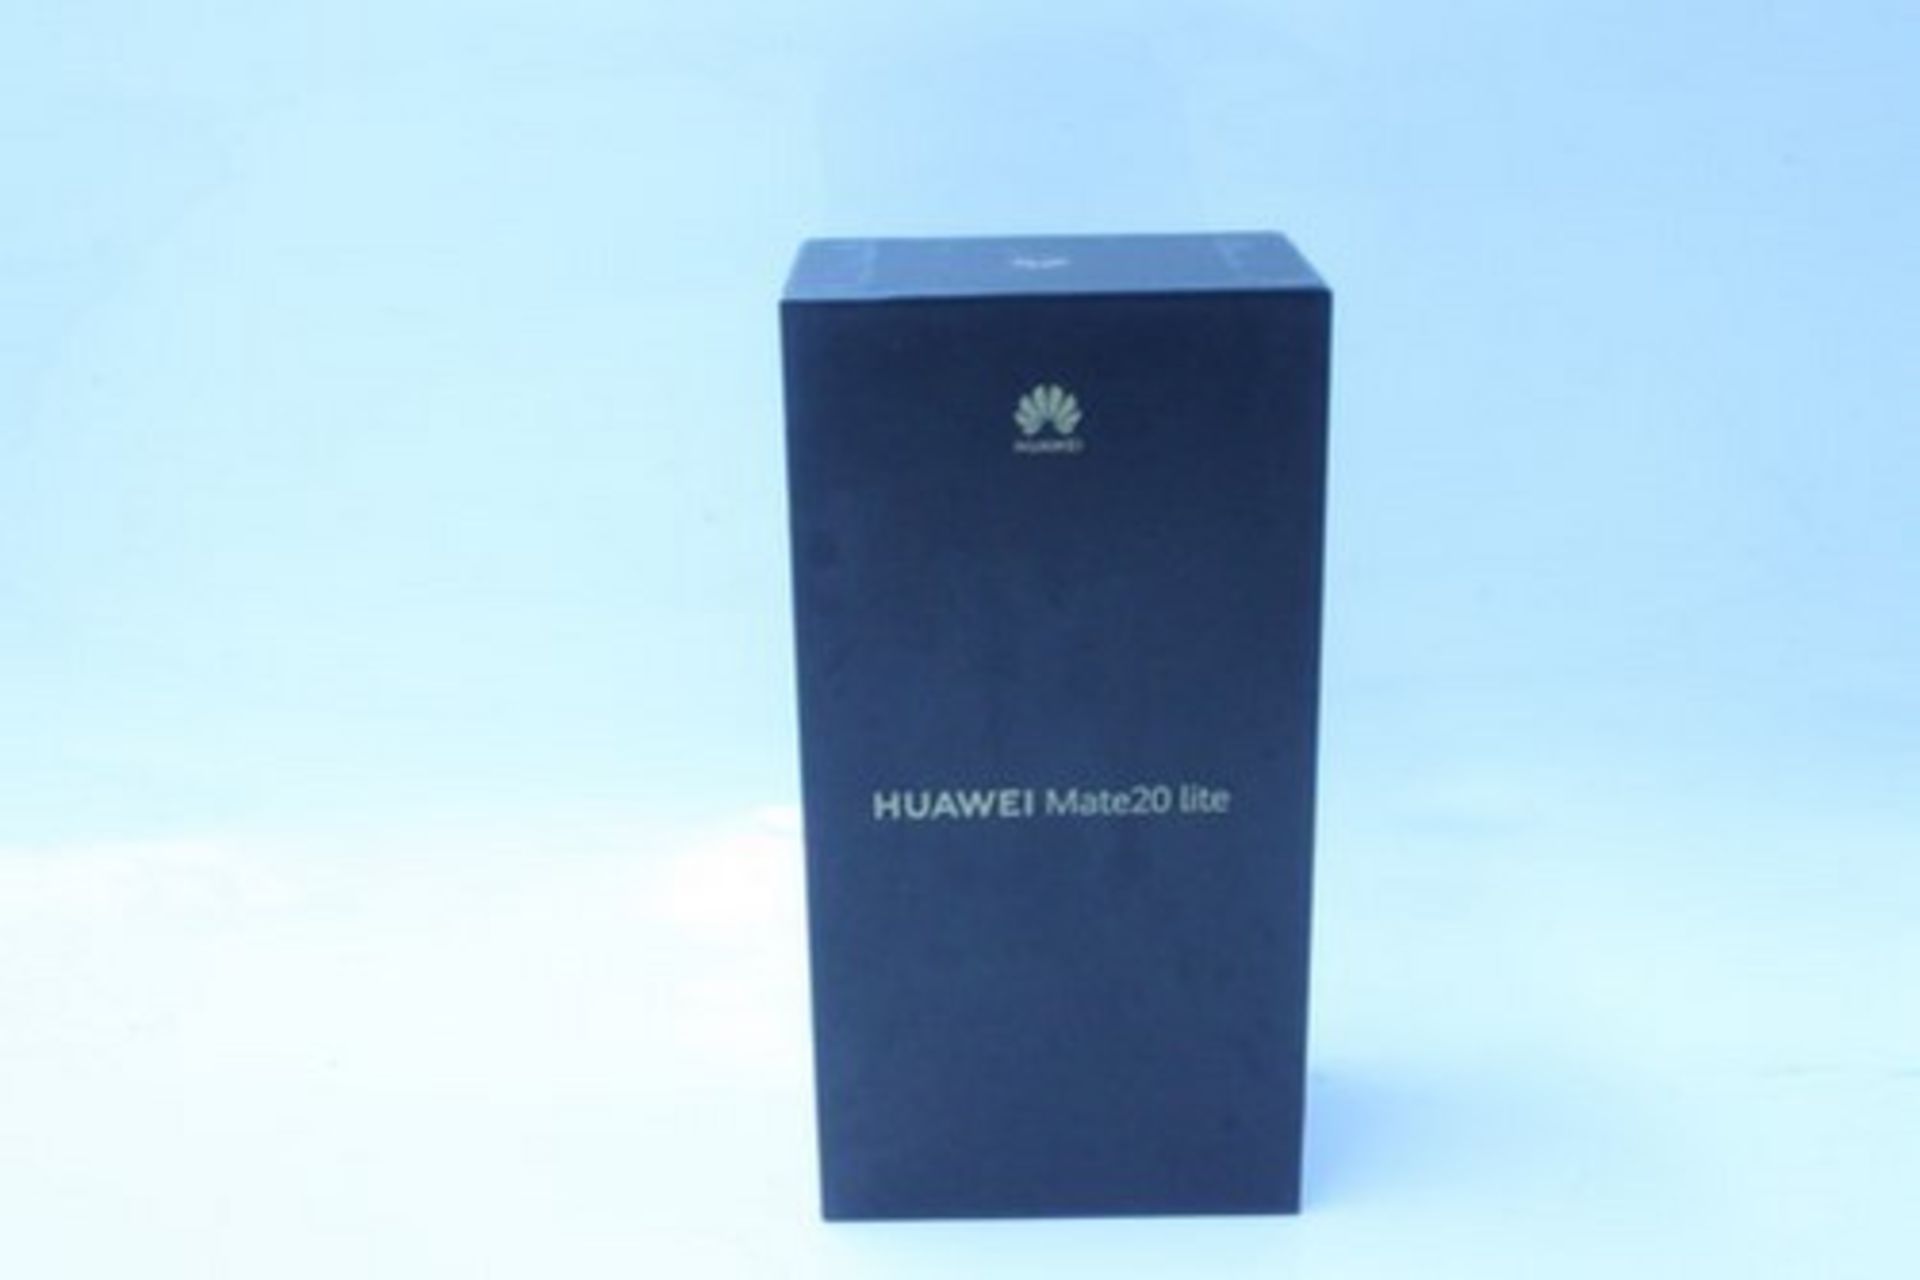 1 x Huawei Mate20 Lite black mobile phone, model SNE-LX3 - Sealed new in box, security seal